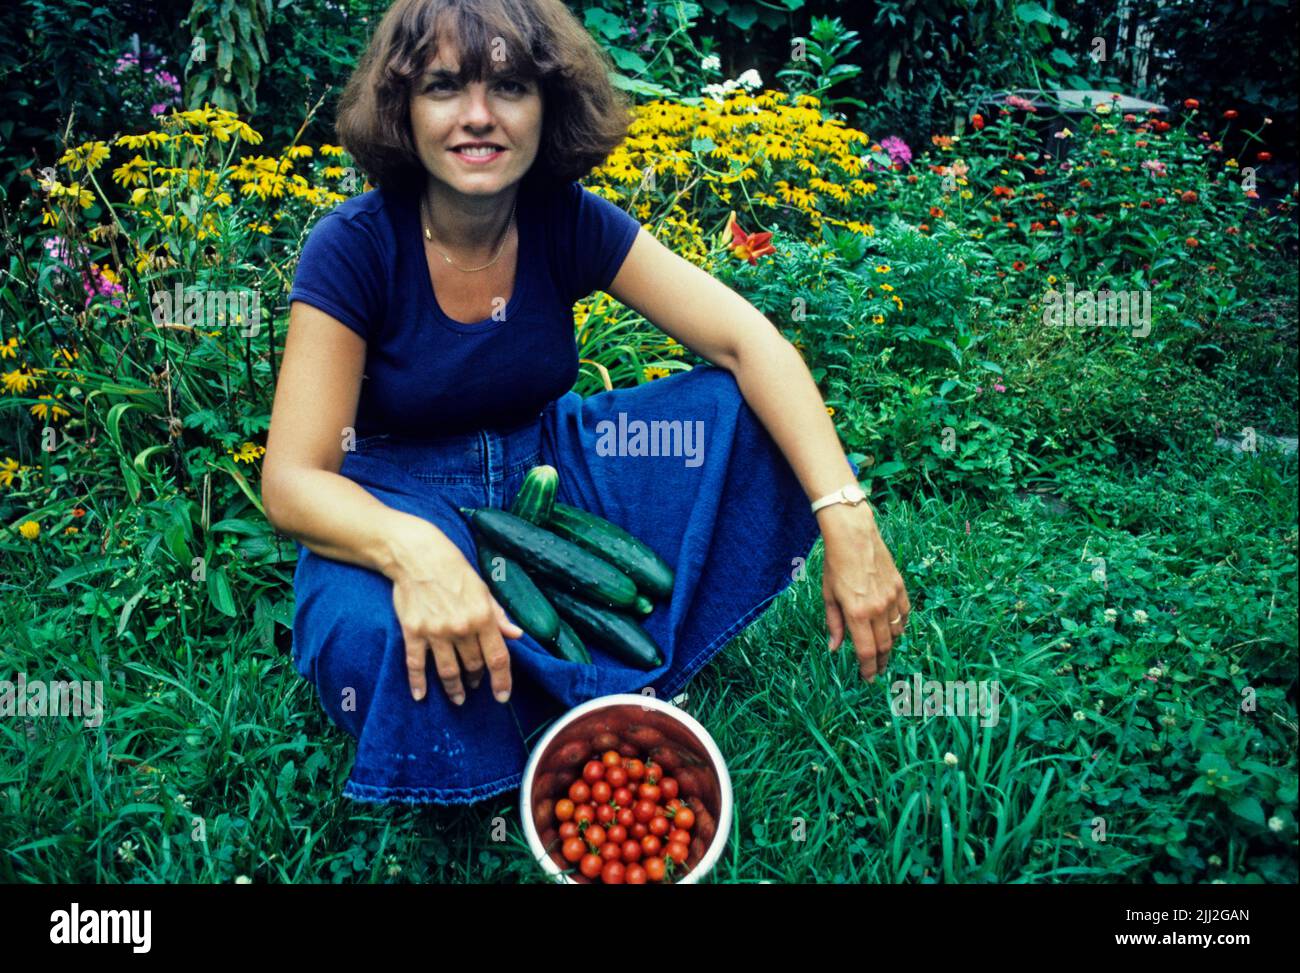 young woman with tomatoes in backyard garden setting, Stock Photo